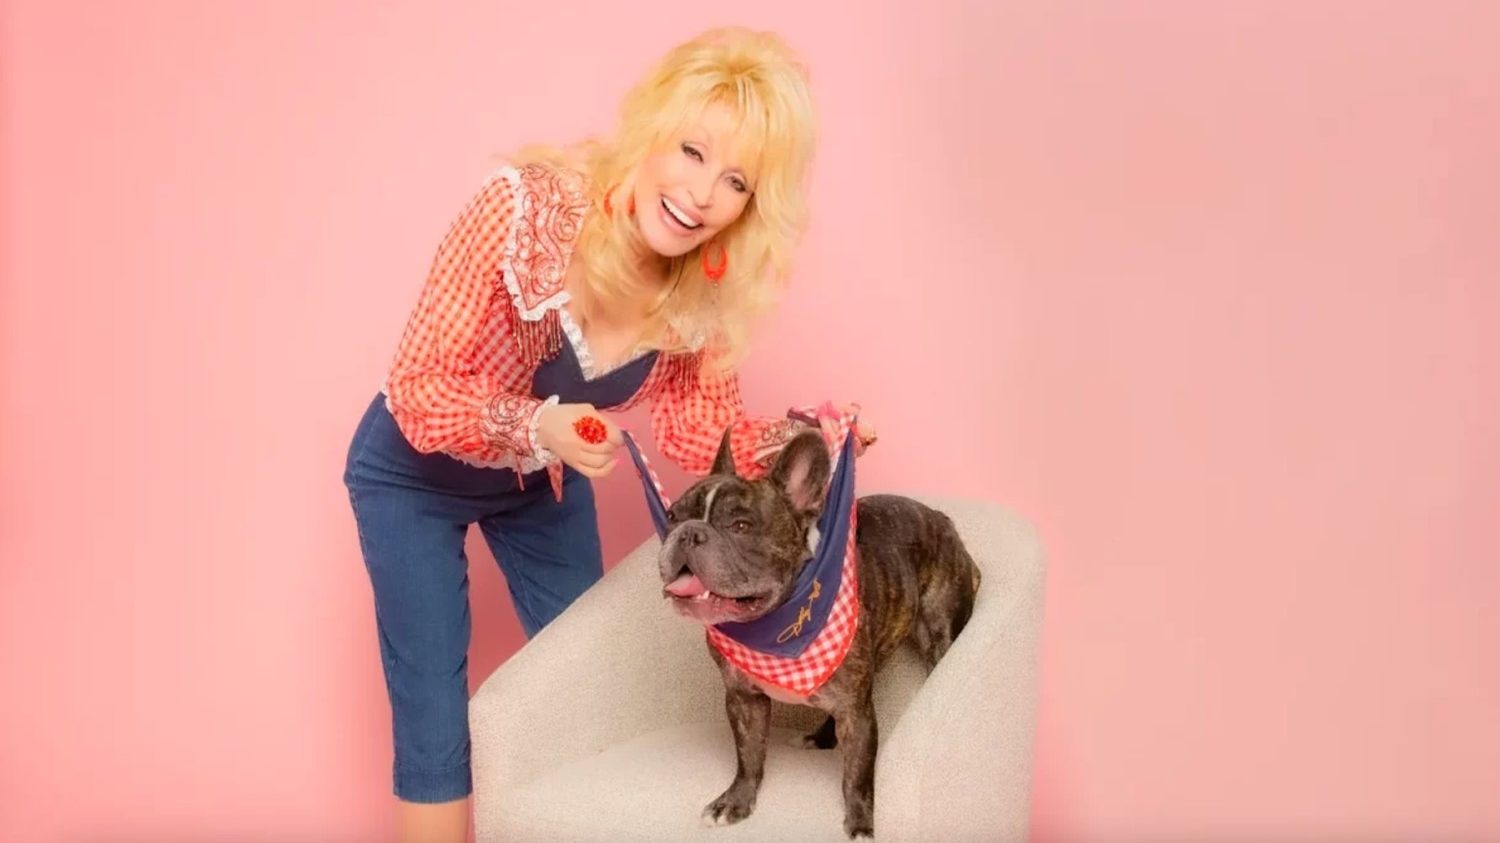 Dolly Parton with dog for Doggy Parton line